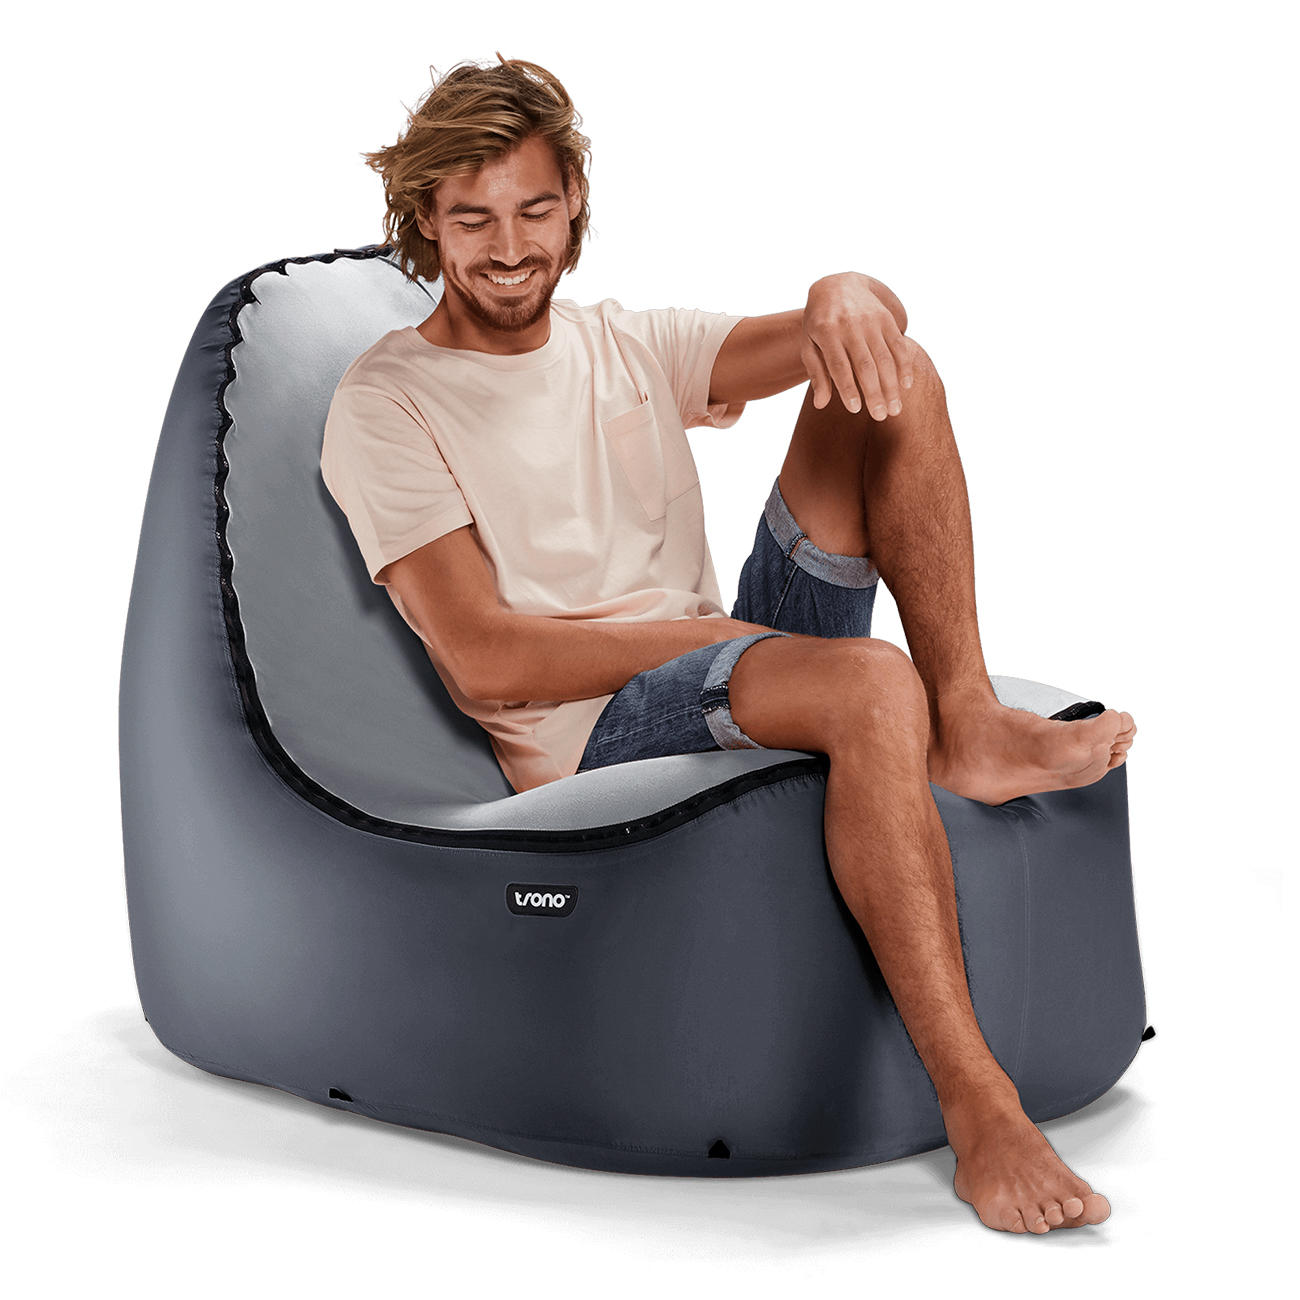 Inflatable Lounge Chair | 3-year product guarantee